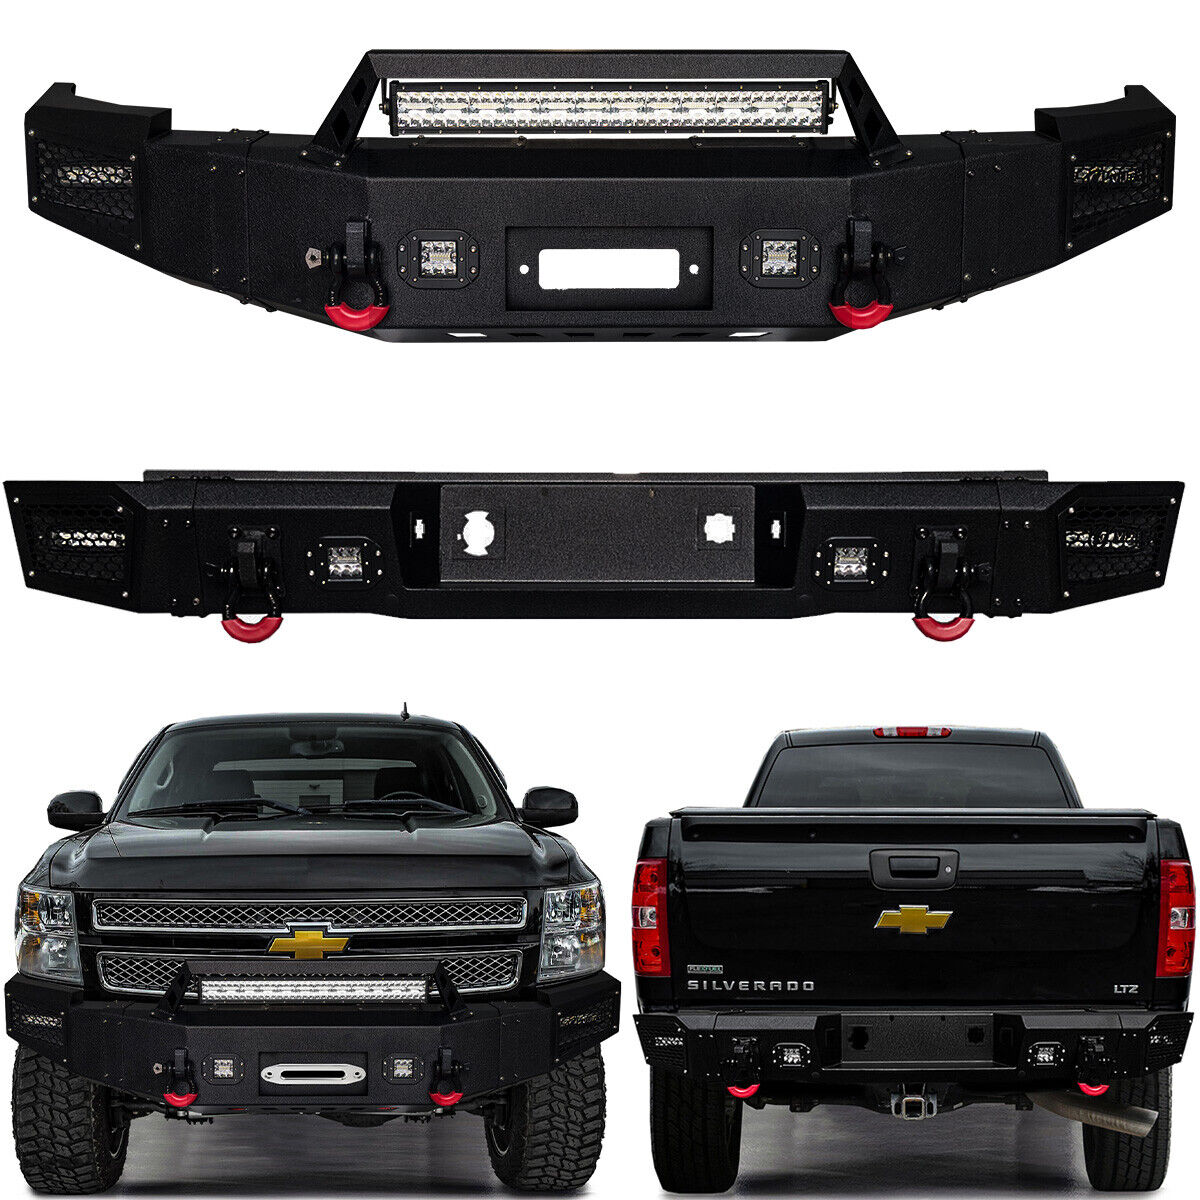 Vijay For 2007-2013 Chevy Silverado 1500 Front or Rear Bumper with LED lights